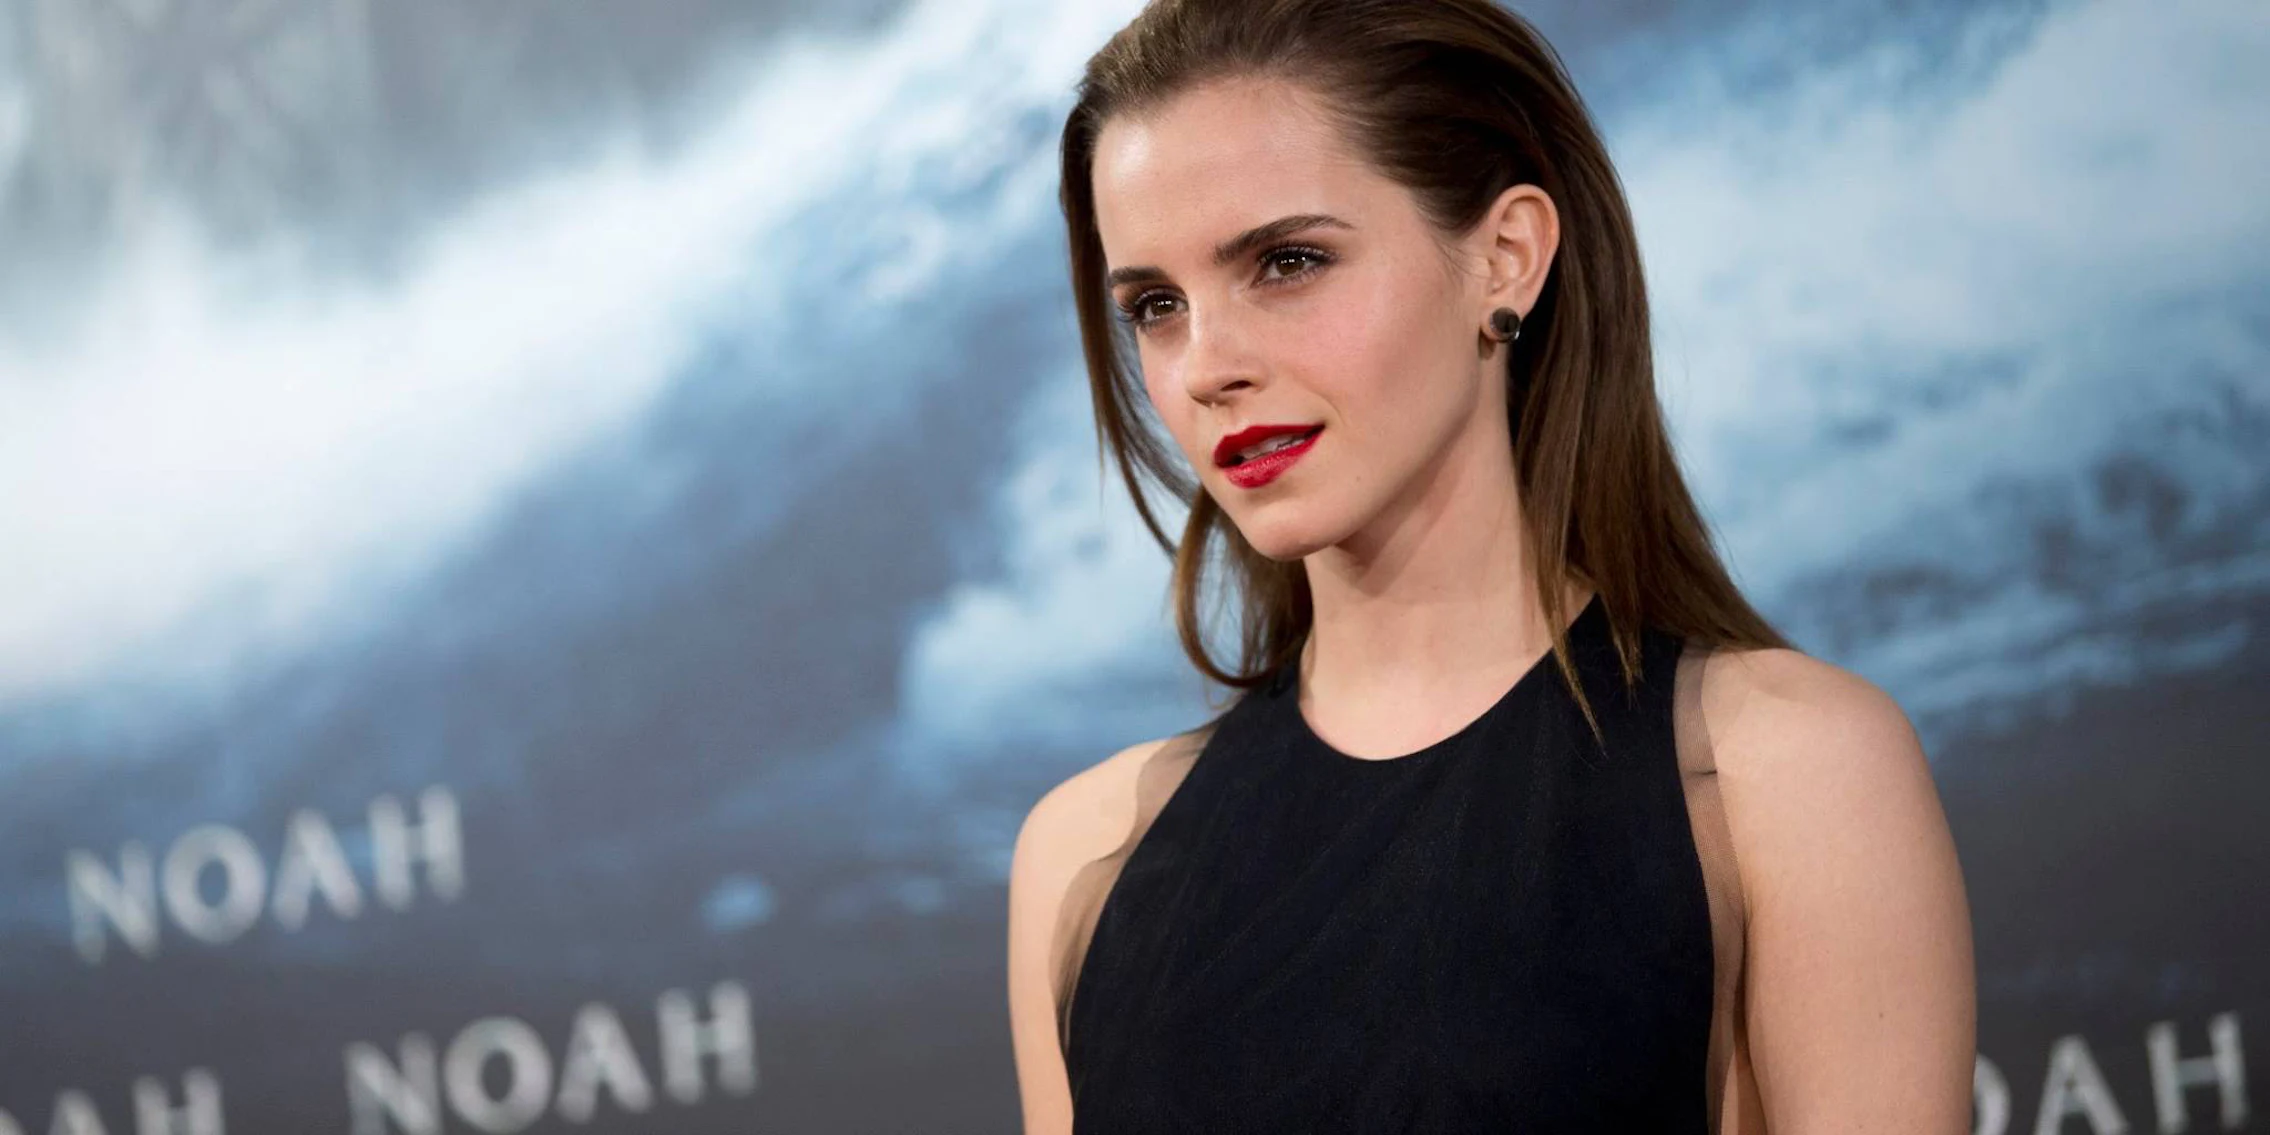 Which fashion brand did Emma Watson collaborate with to create an eco-friendly fashion line?